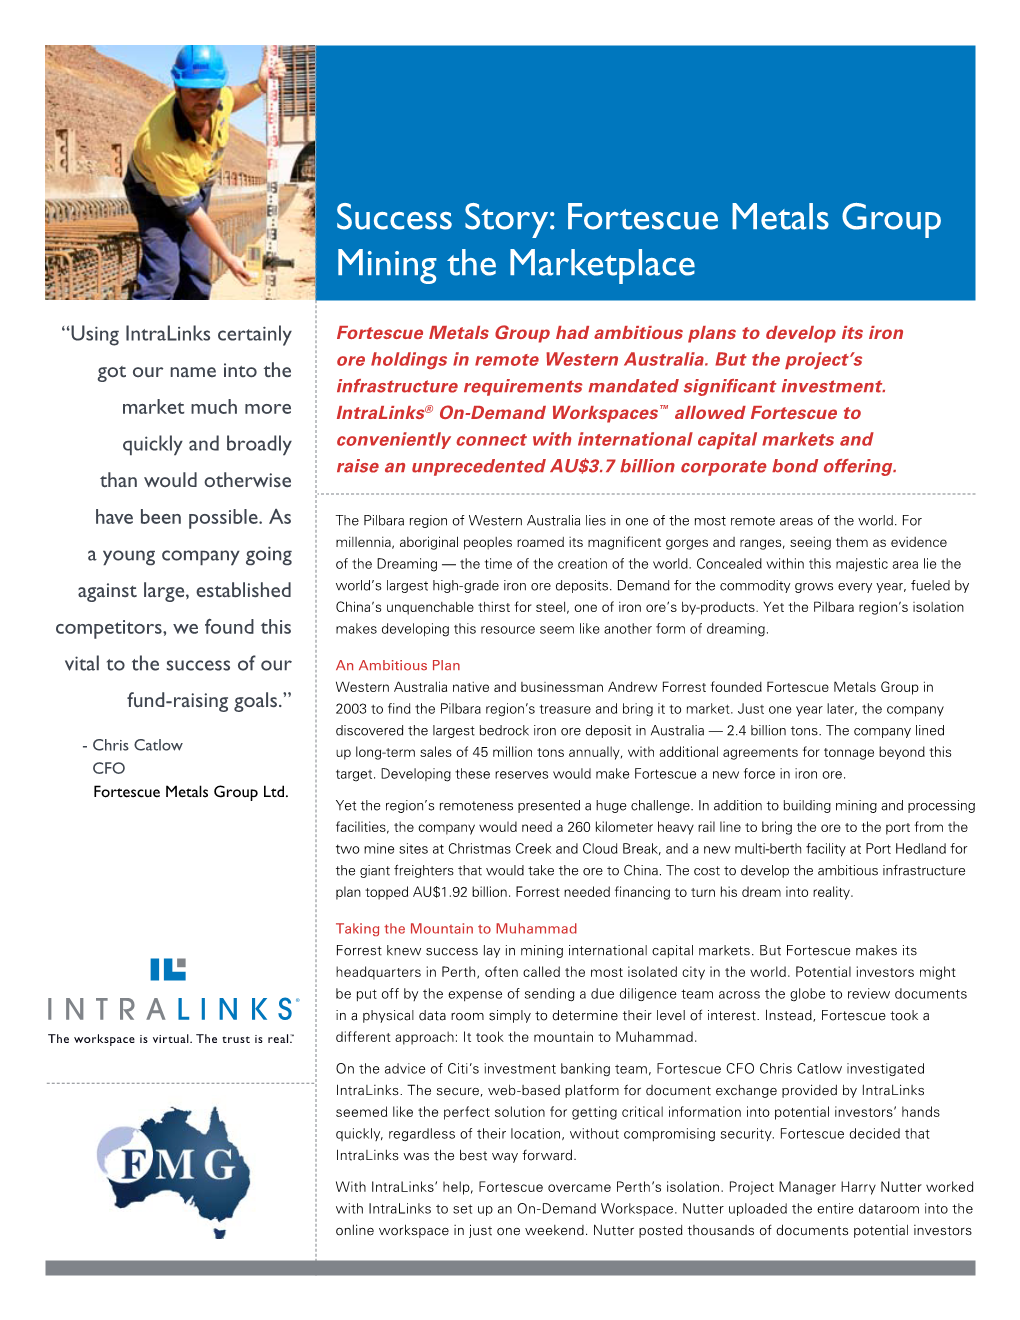 Fortescue Metals Group Mining the Marketplace